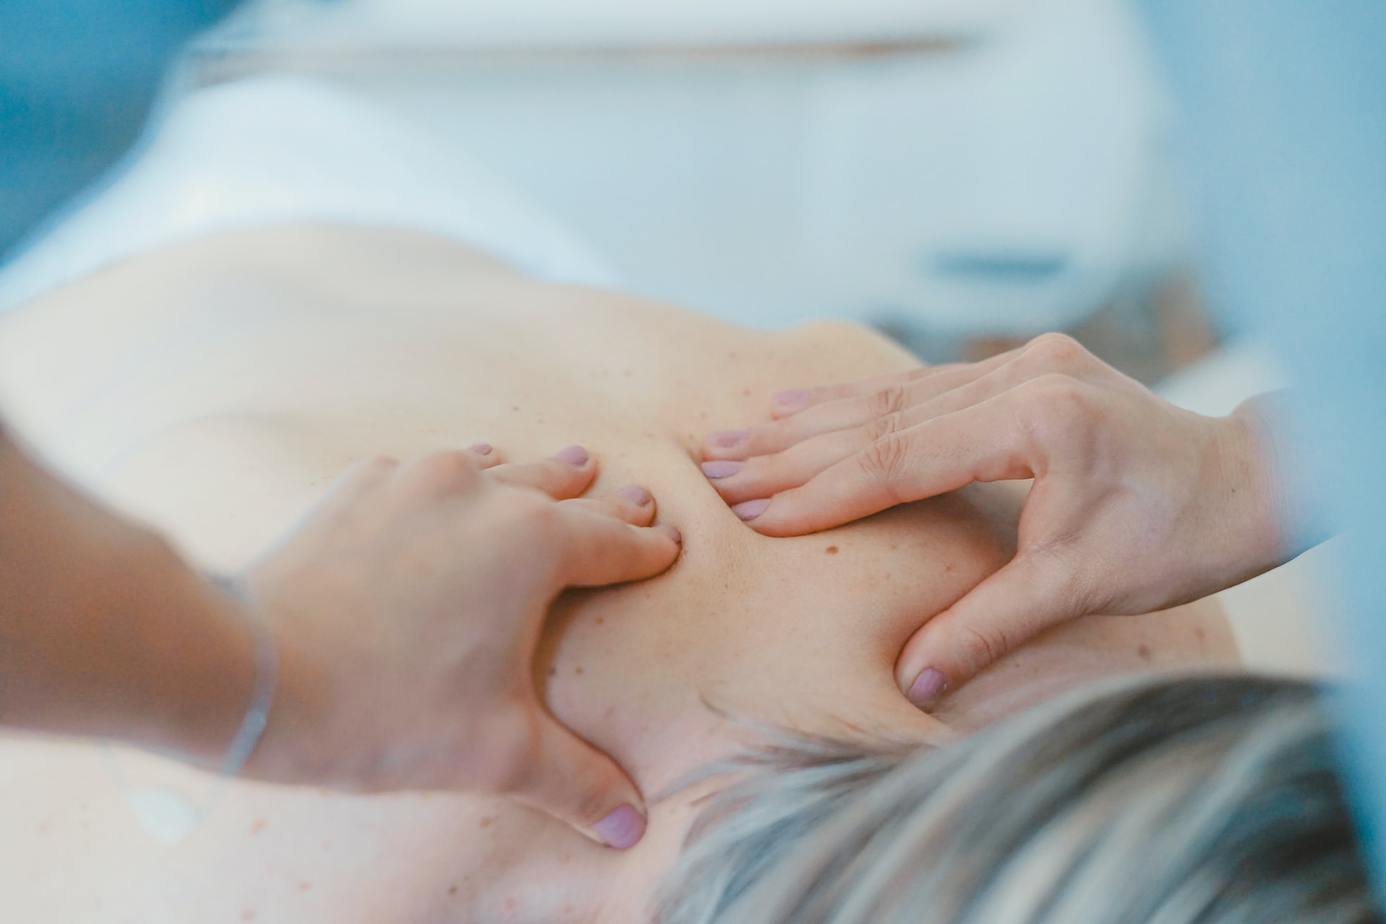 Do you know what a classic massage is?